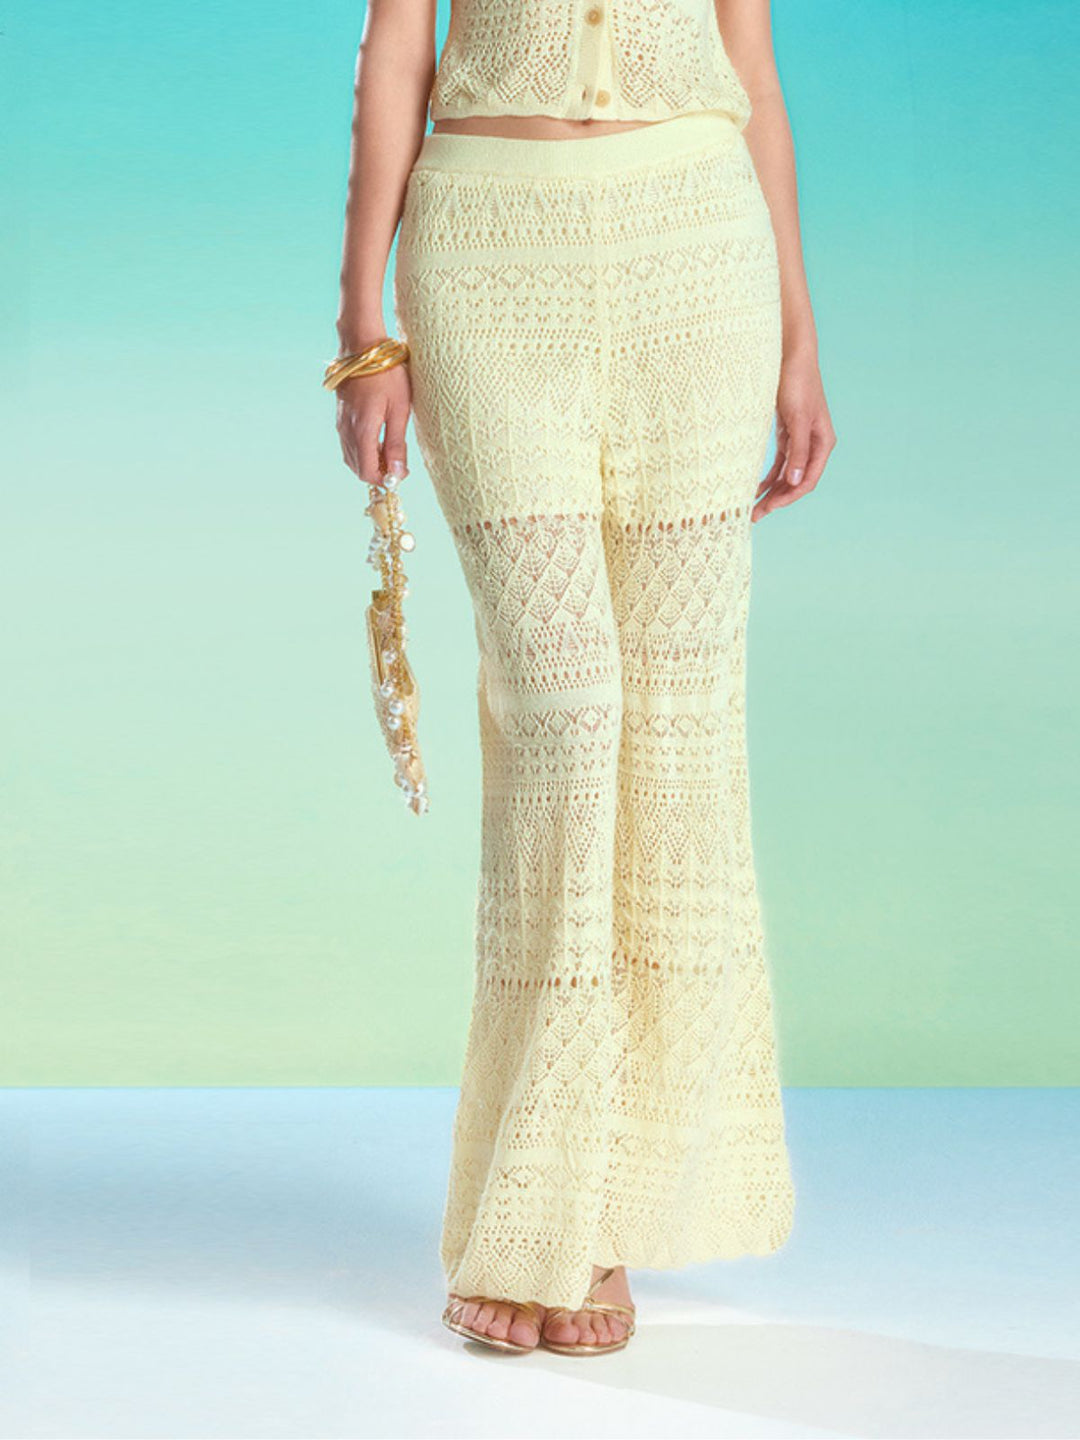 Hollow Knitted Crochet Pants